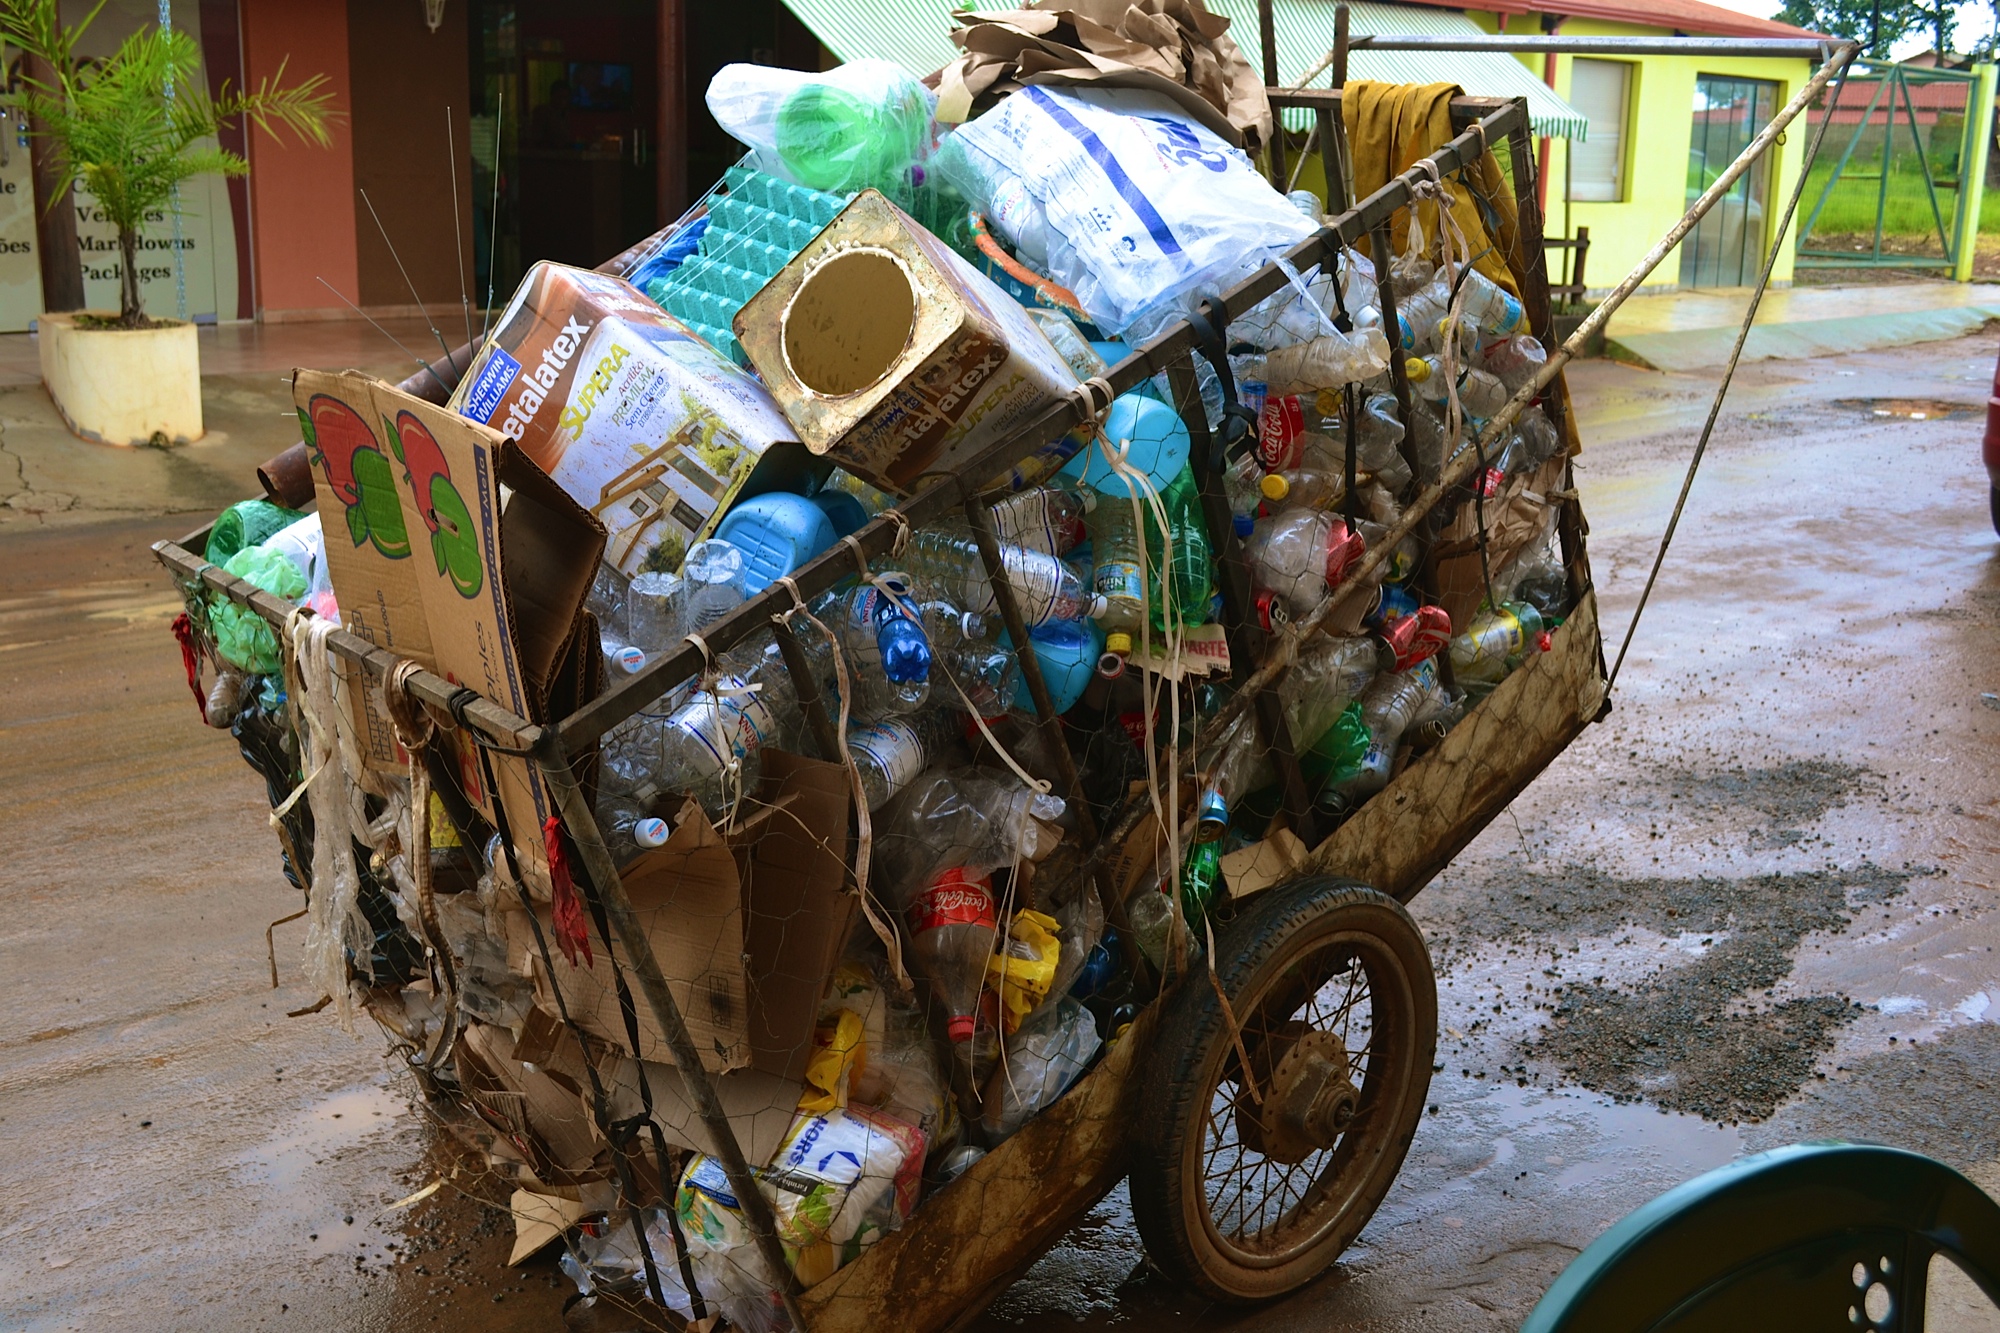 Recycling cart - If they can do, we can too.